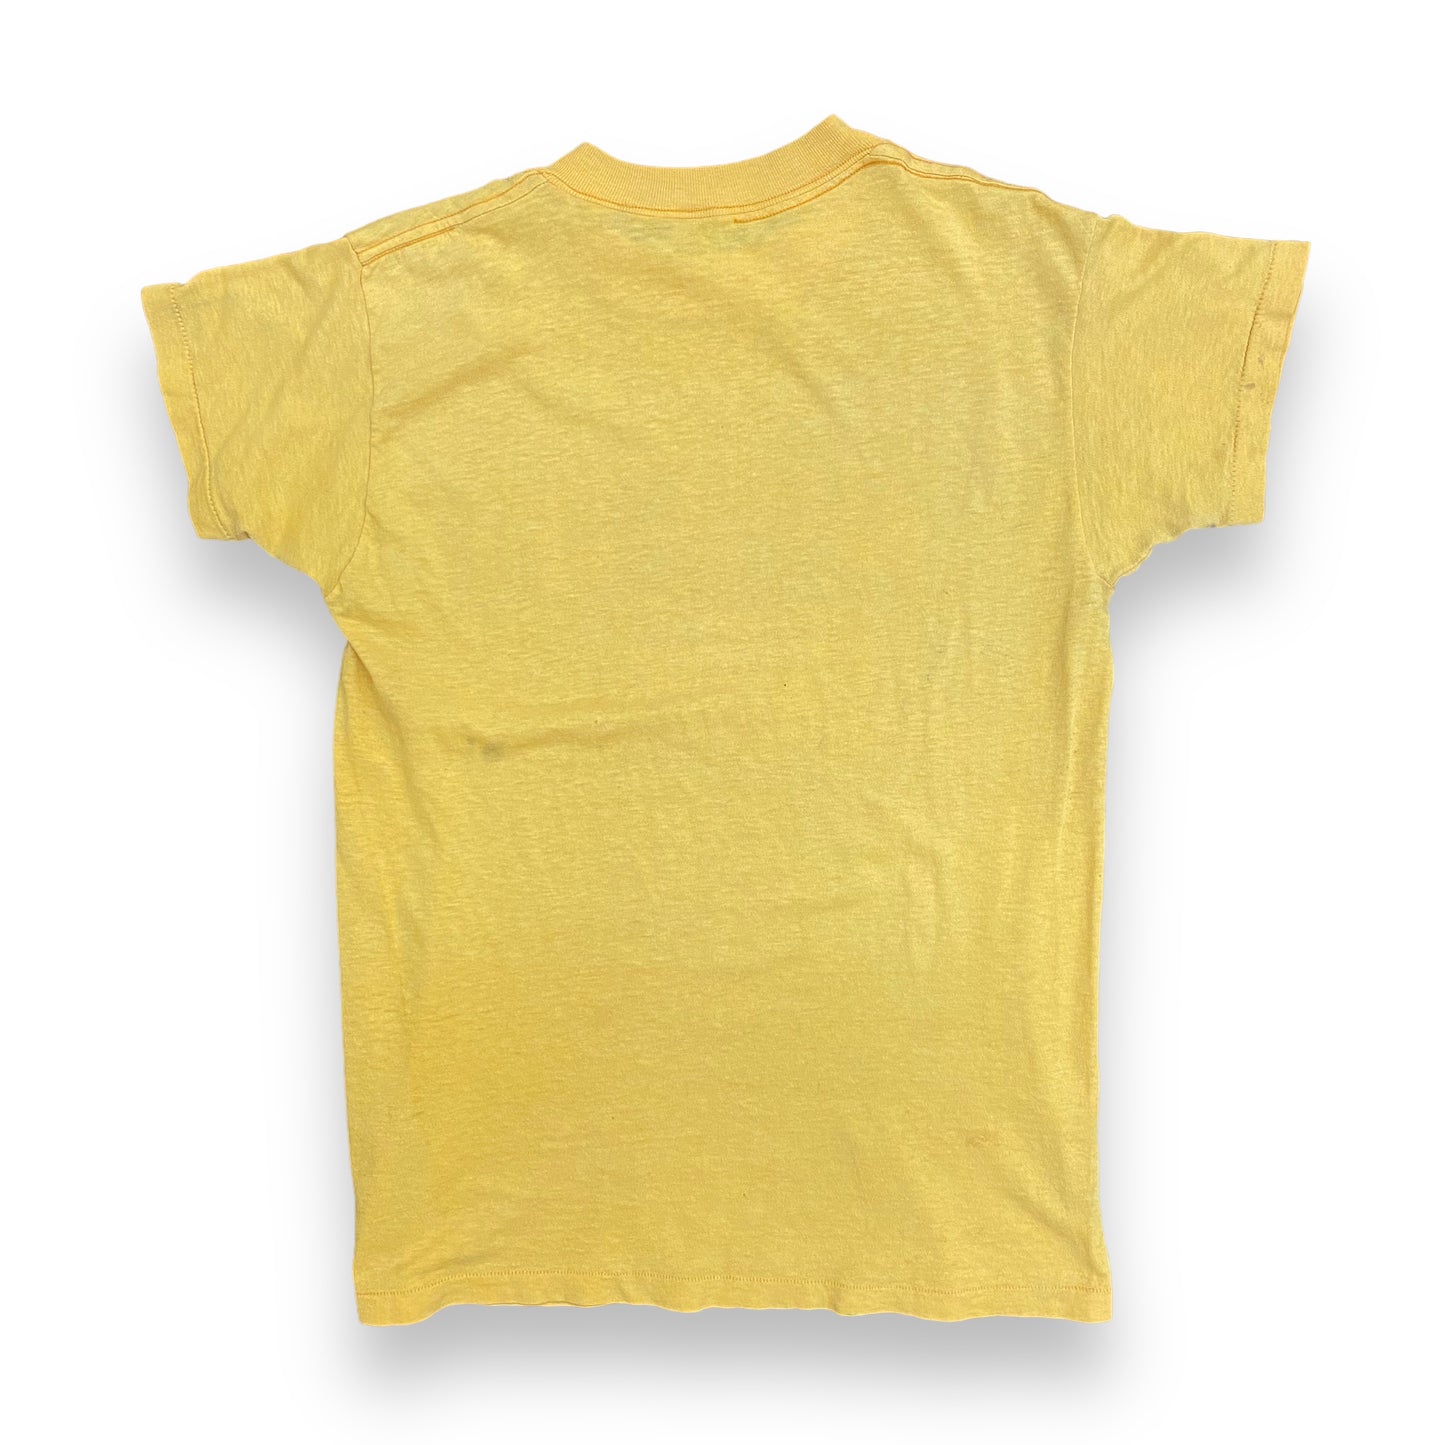 Vintage 1970s "I Love Her" Yellow Single Stitch Tee - Size Small